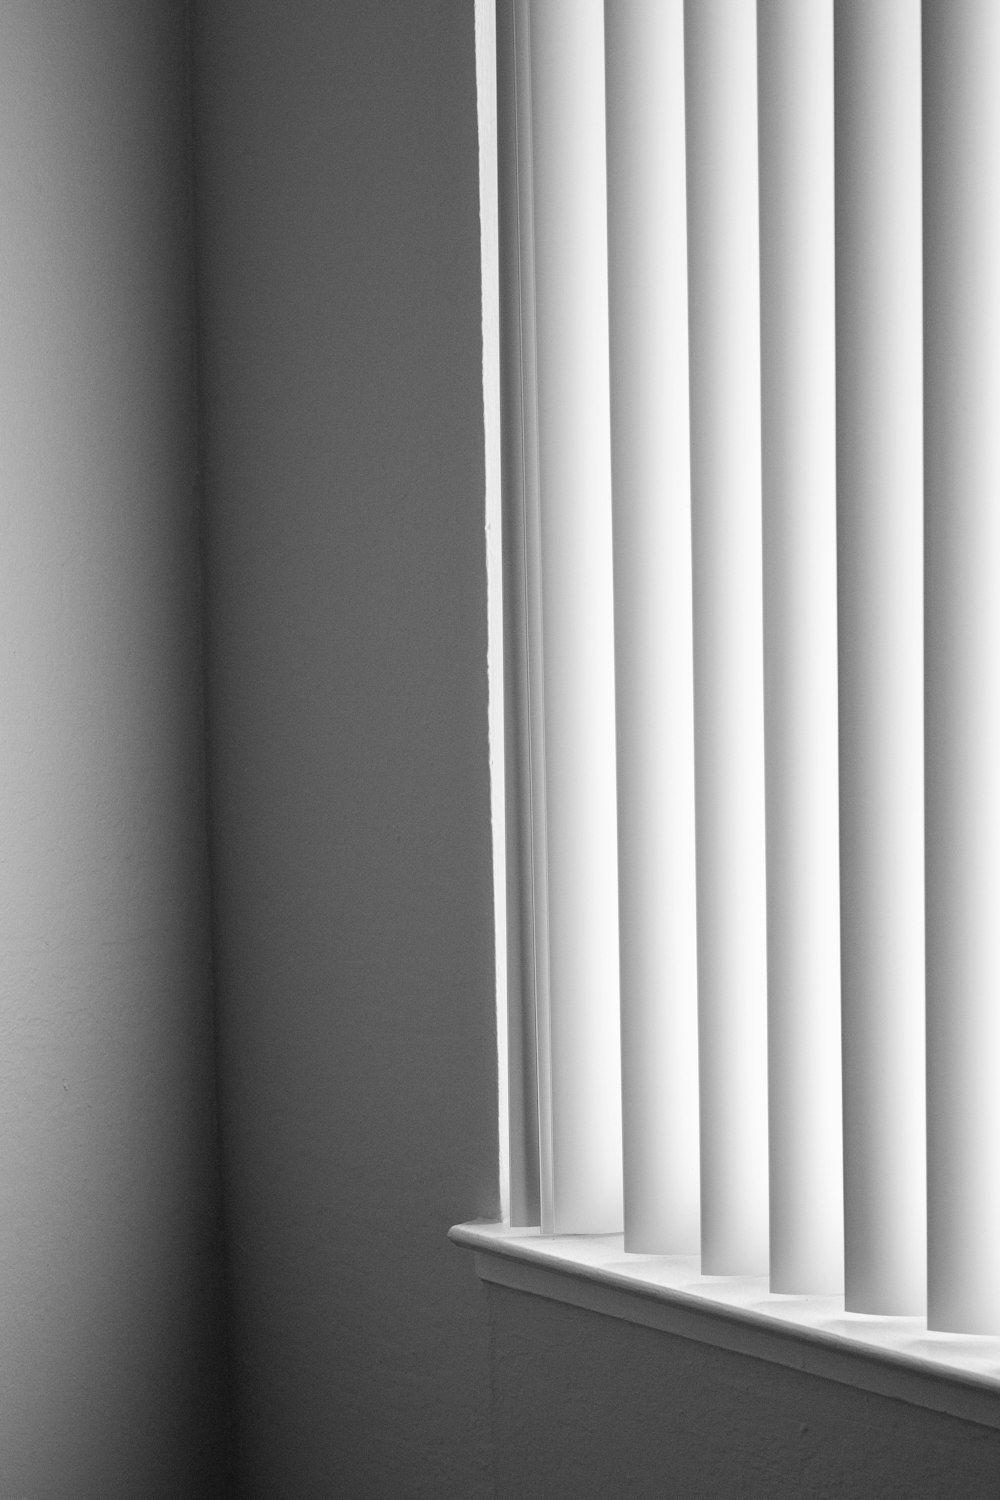 a black and white photo of a window with blinds